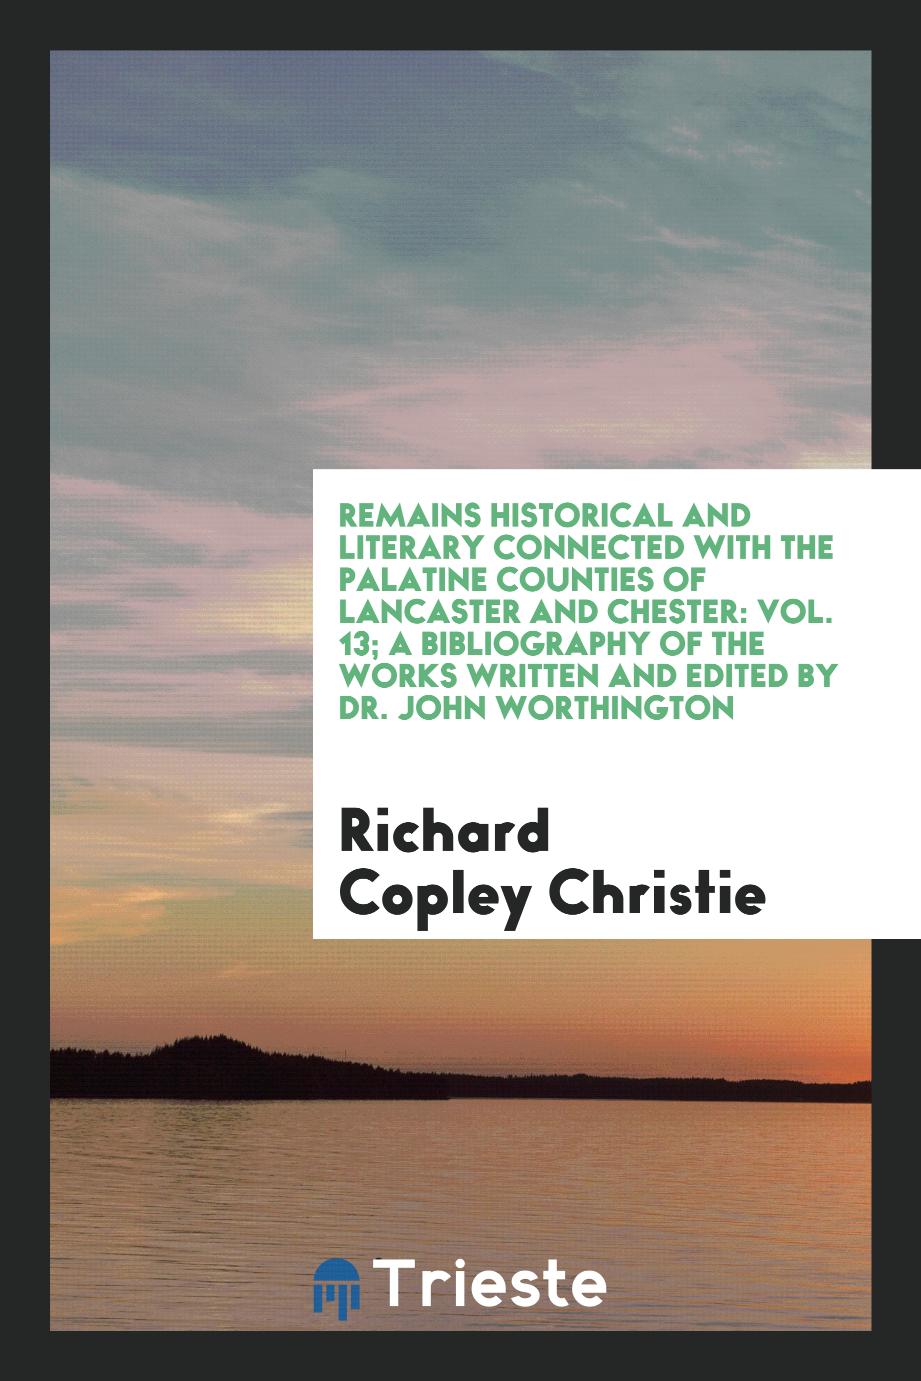 Remains Historical and Literary Connected with the Palatine Counties of Lancaster and Chester: Vol. 13; A Bibliography of the Works Written and Edited by Dr. John Worthington